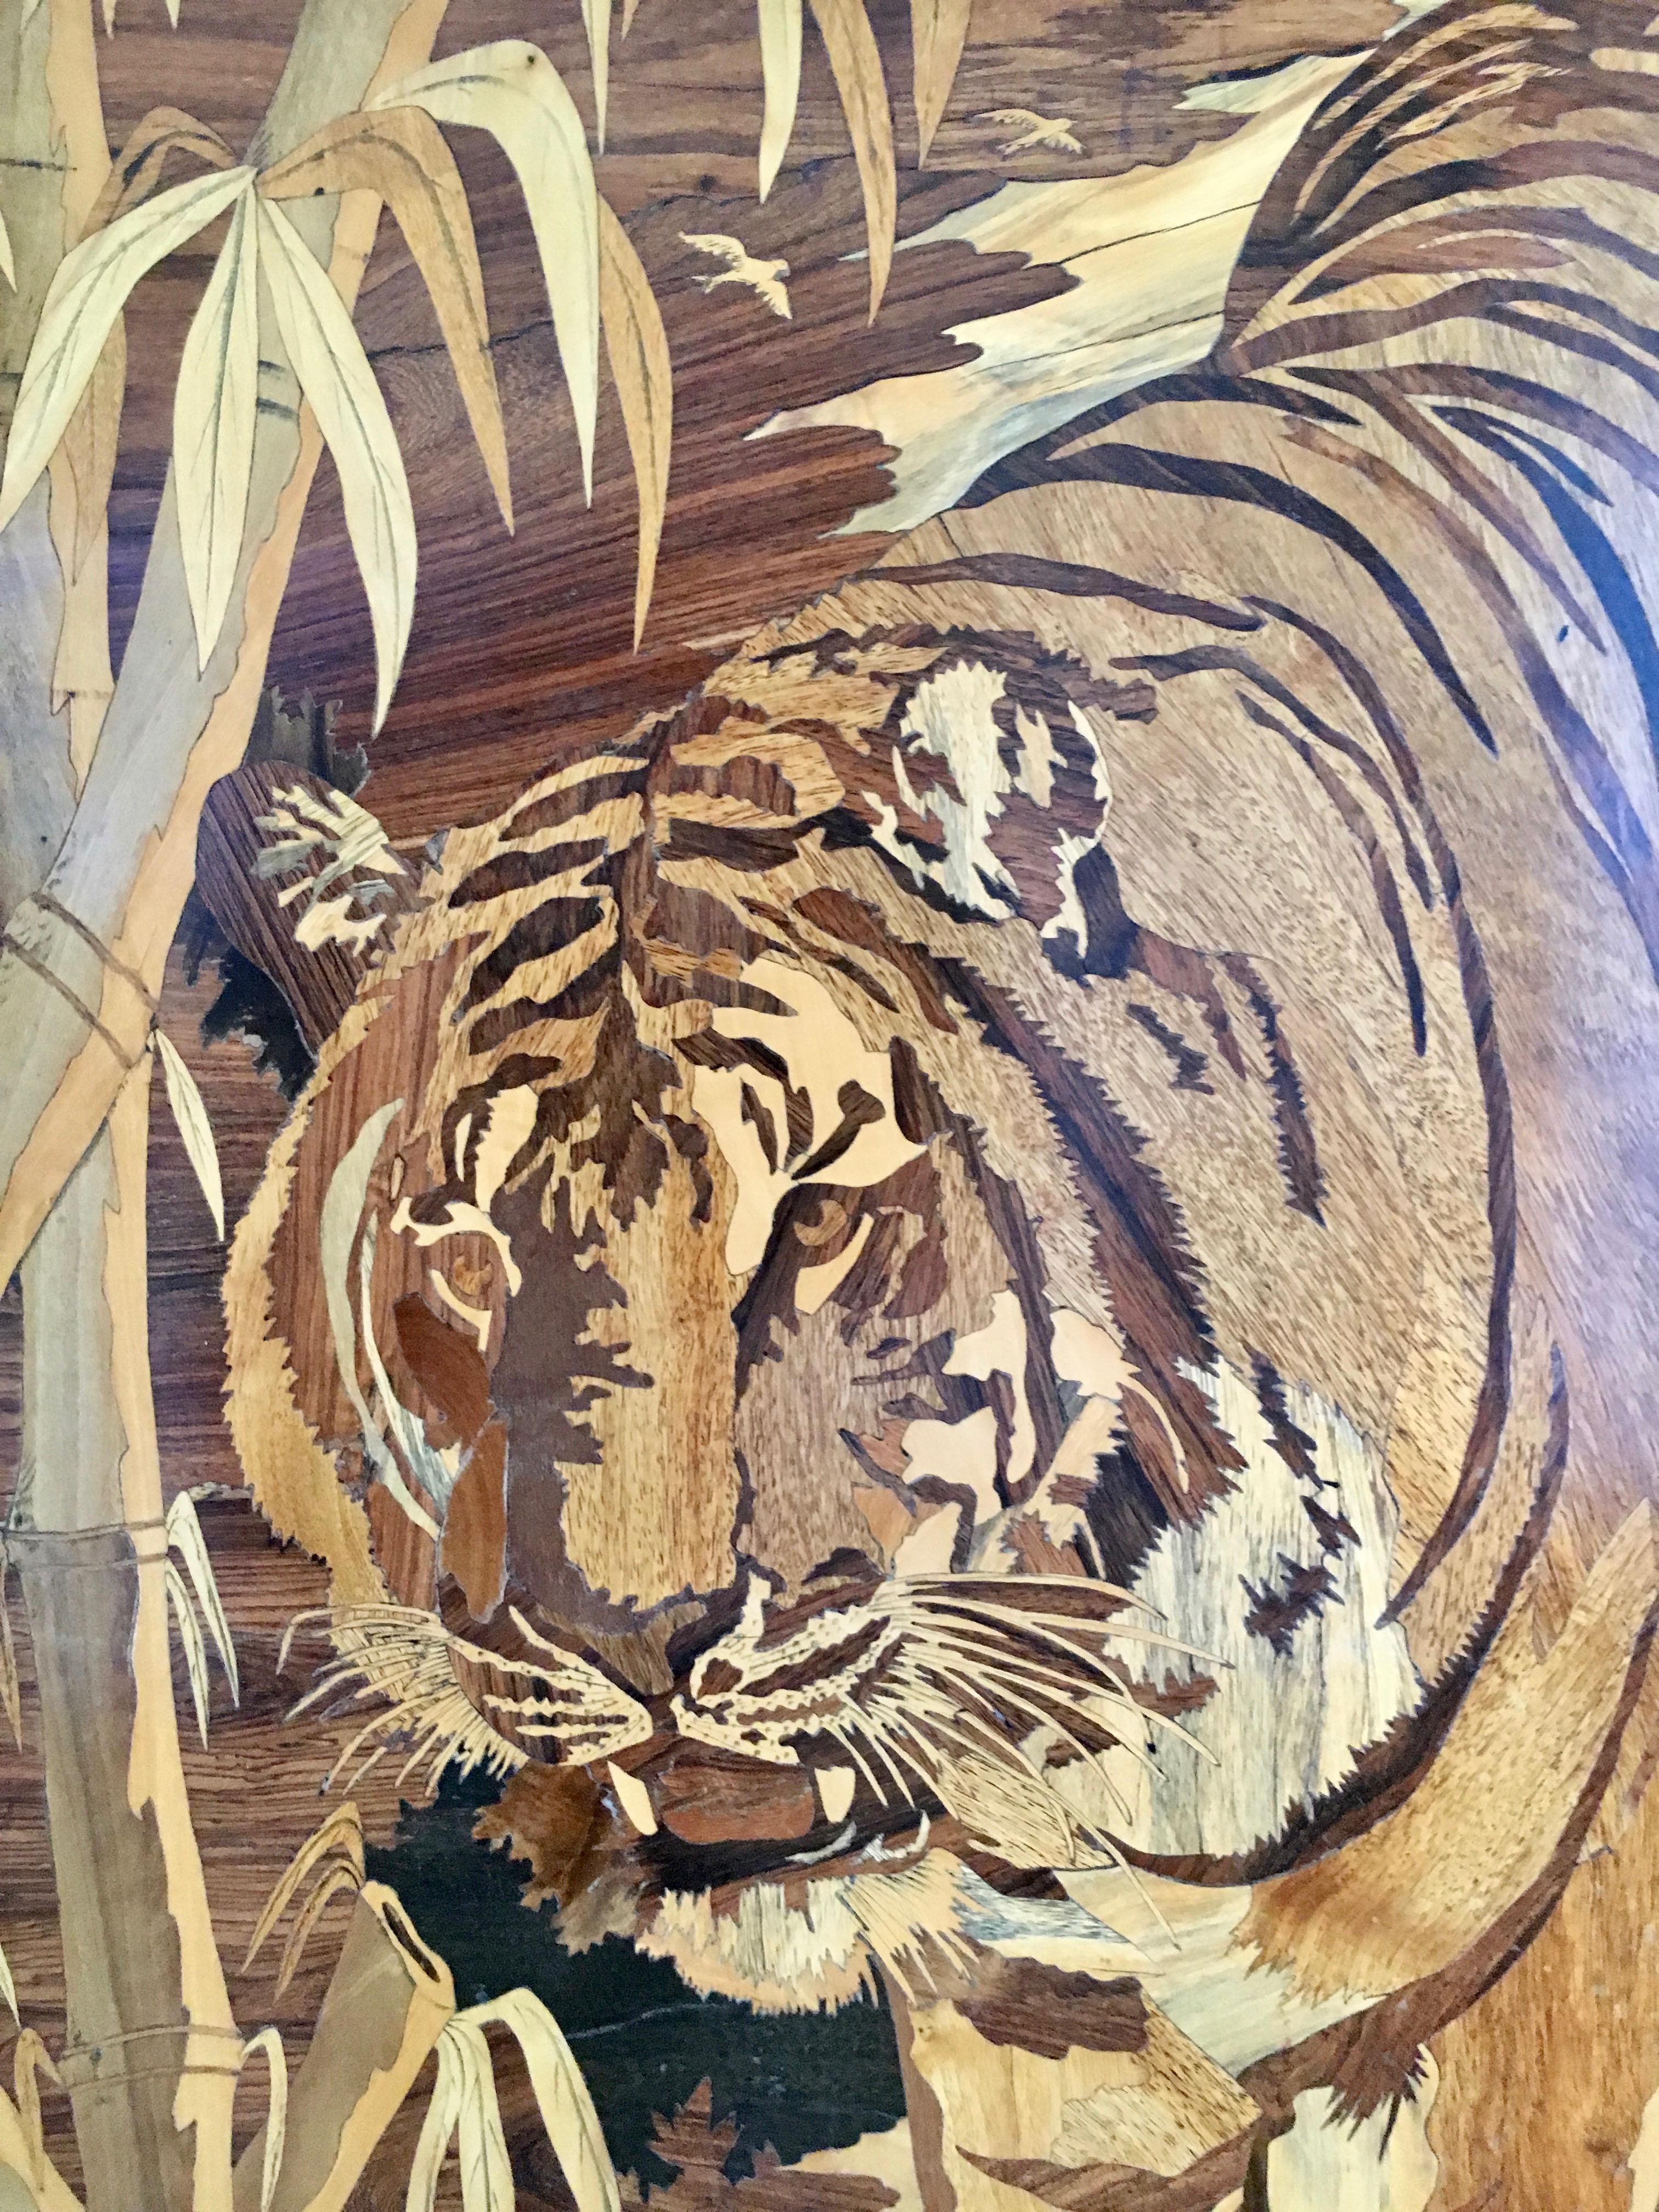 Intricately detailed inlaid marquetry image of a lion in the wild. Fabricated of cherry, maple, rosewoods and more. A handsome display of time and quality in this Folk Art piece - perfect for the nature, animal lover to proudly hang in many rooms.